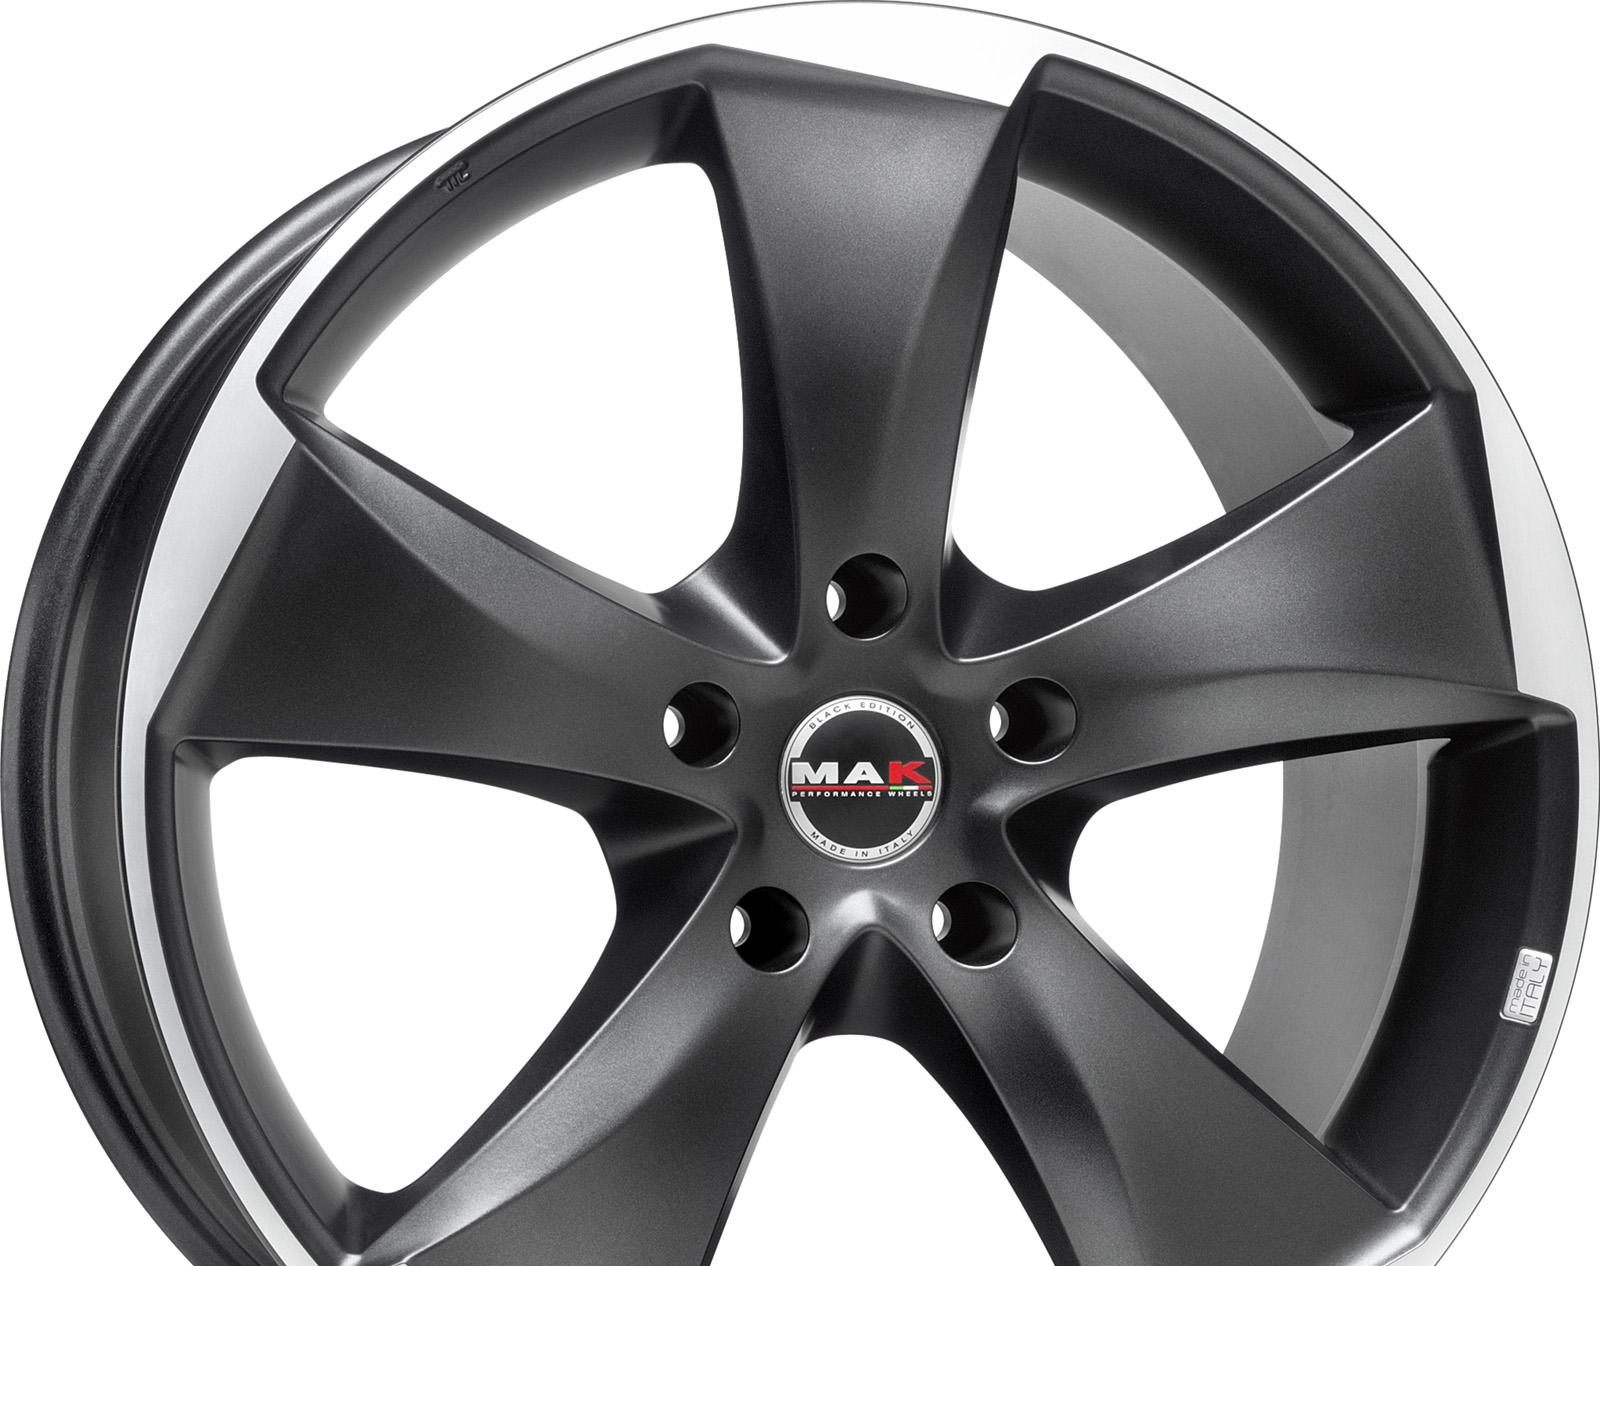 Wheel Mak Raptor 5 Grap.-MirFace 19x9.5inches/5x120mm - picture, photo, image